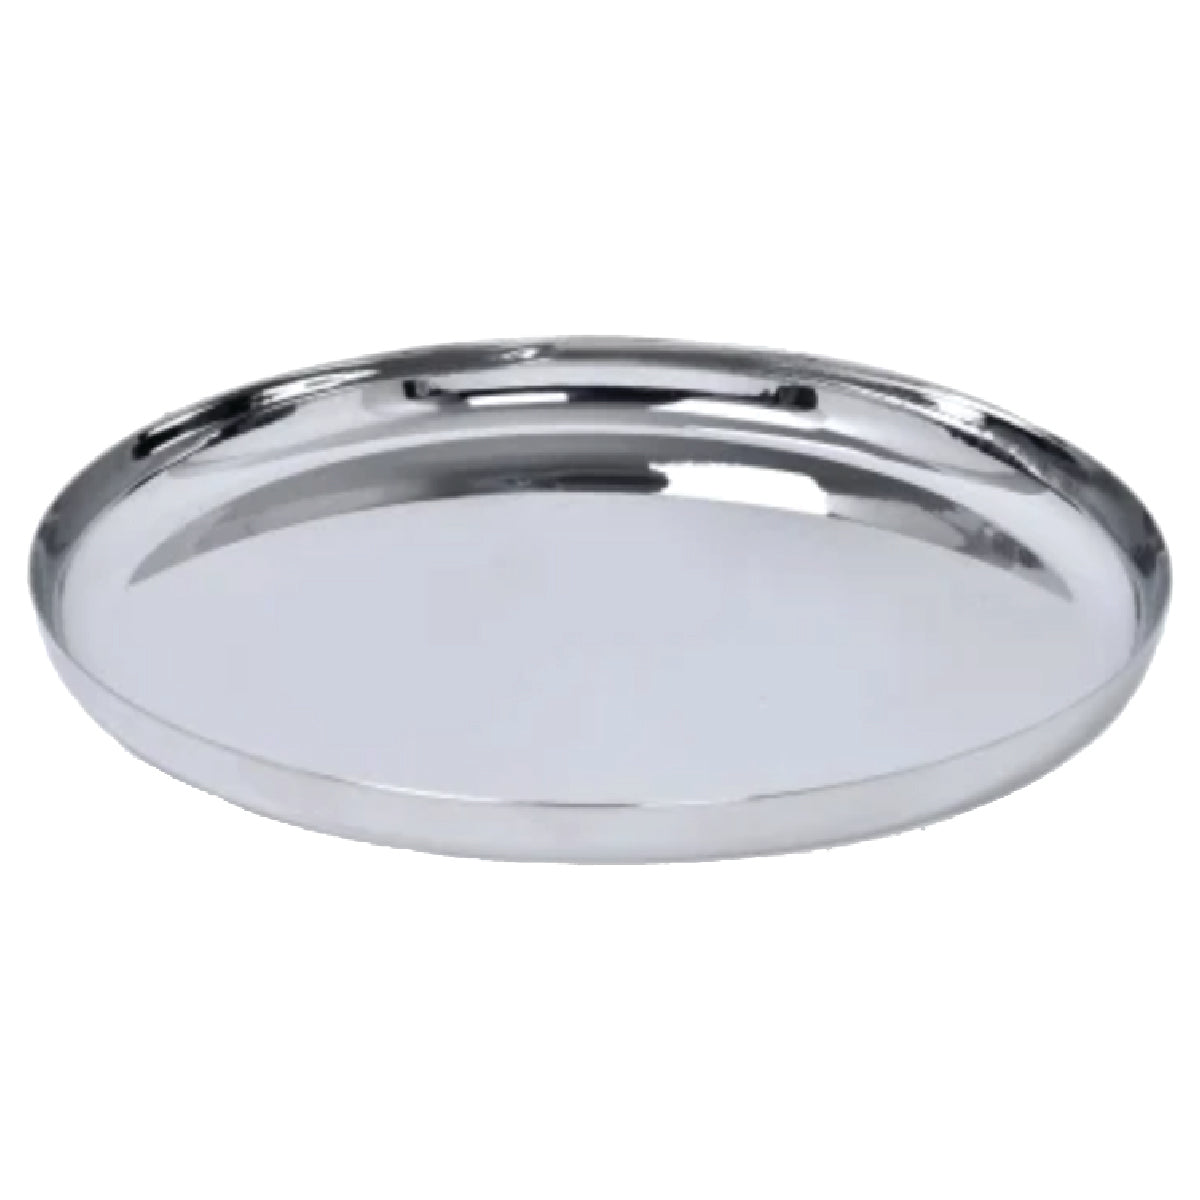 Stainless Steel Dinner Plate - 20x3.7cm - AT-10